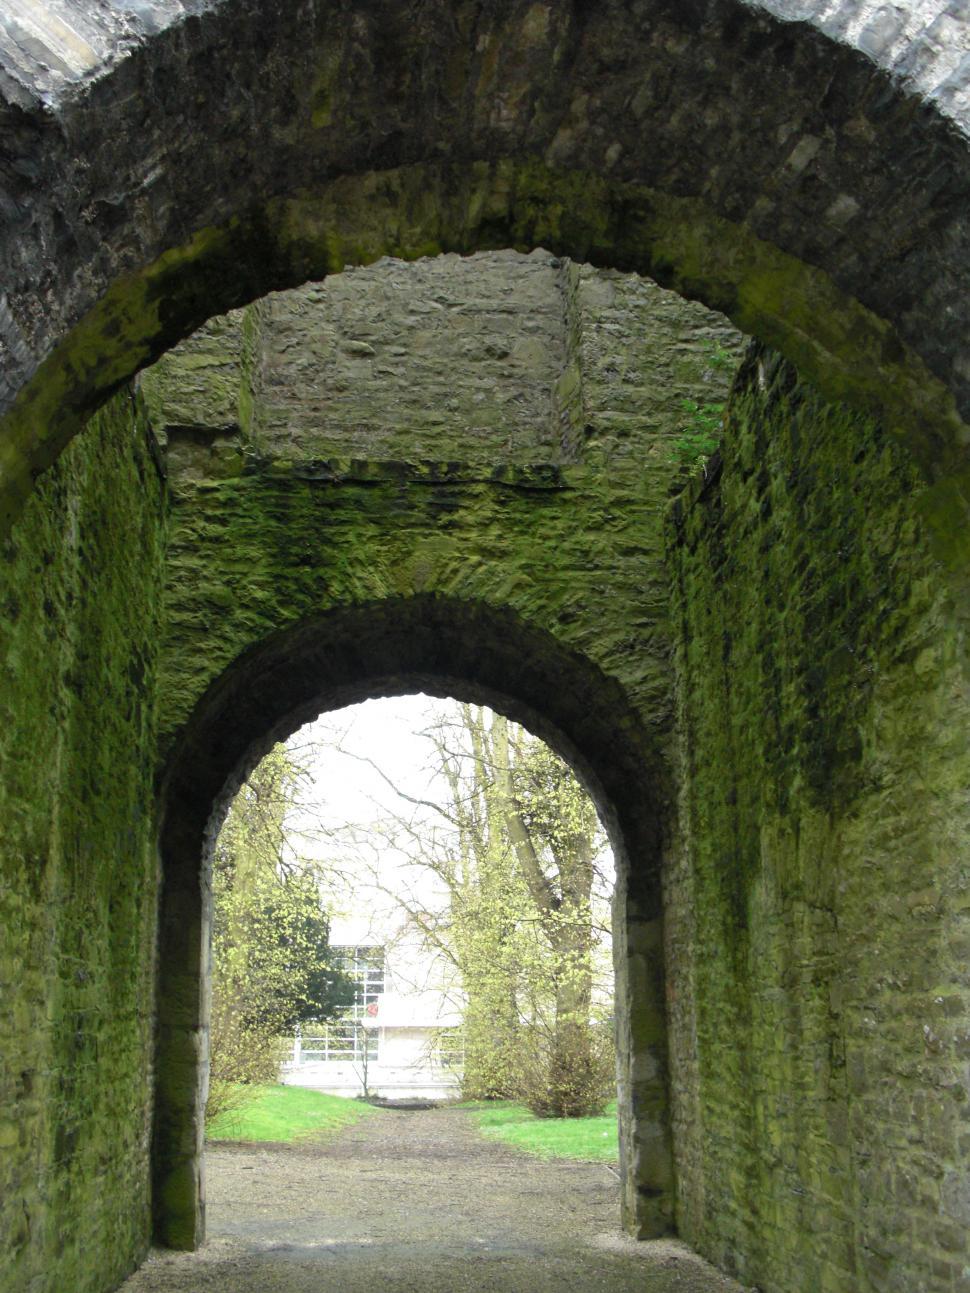 Free Image of Moss-Covered Stone Archway 